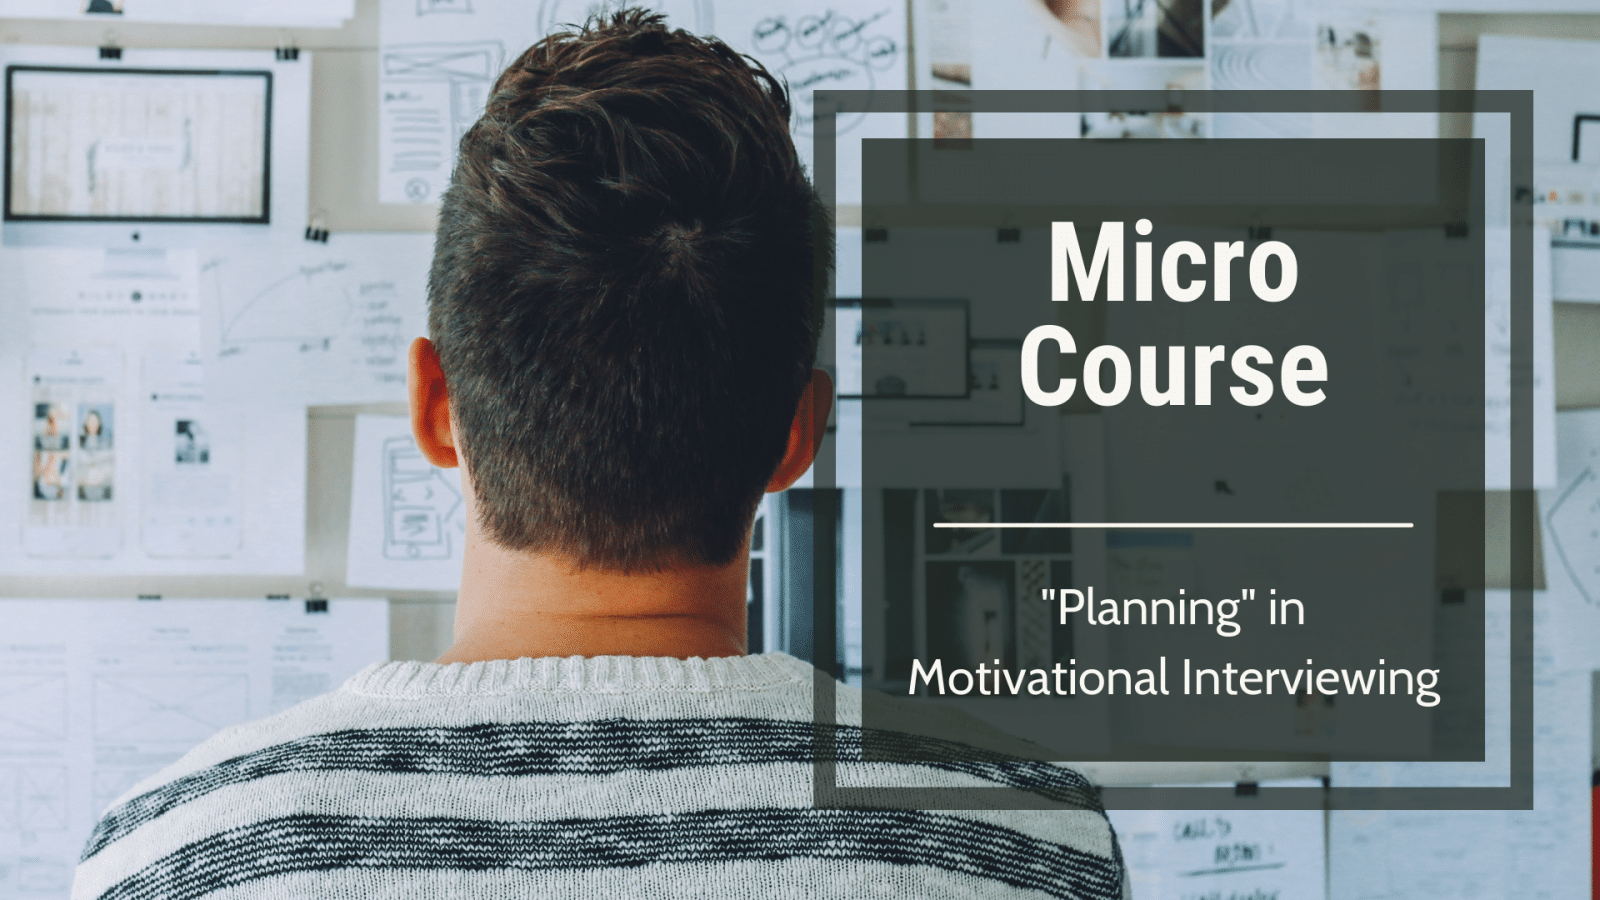 Micro-course: Planning in Motivational Interviewing